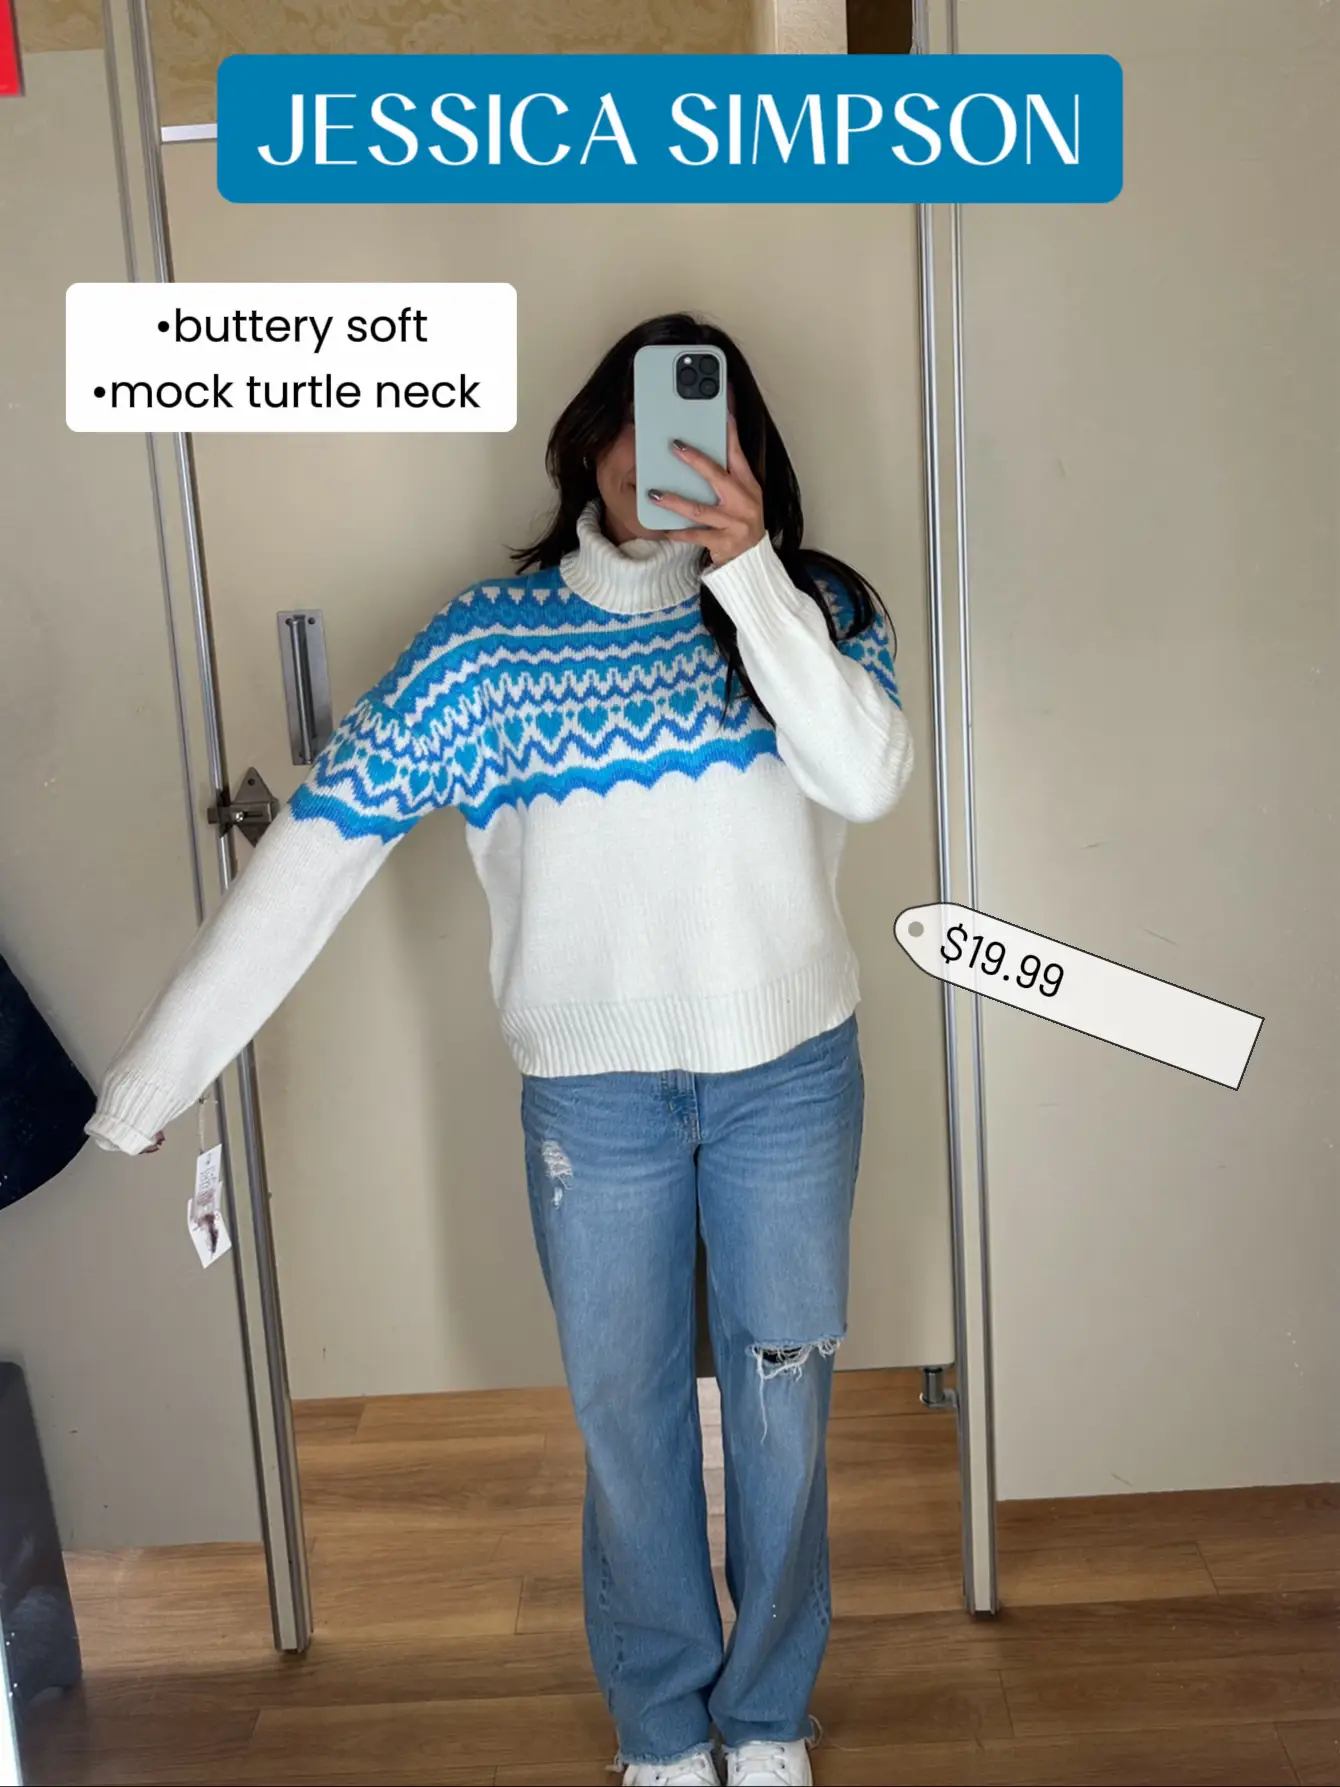  A woman is taking a selfie in a store. She is wearing a brown sweater and jeans. The sweater is described as buttery soft and has a turtle